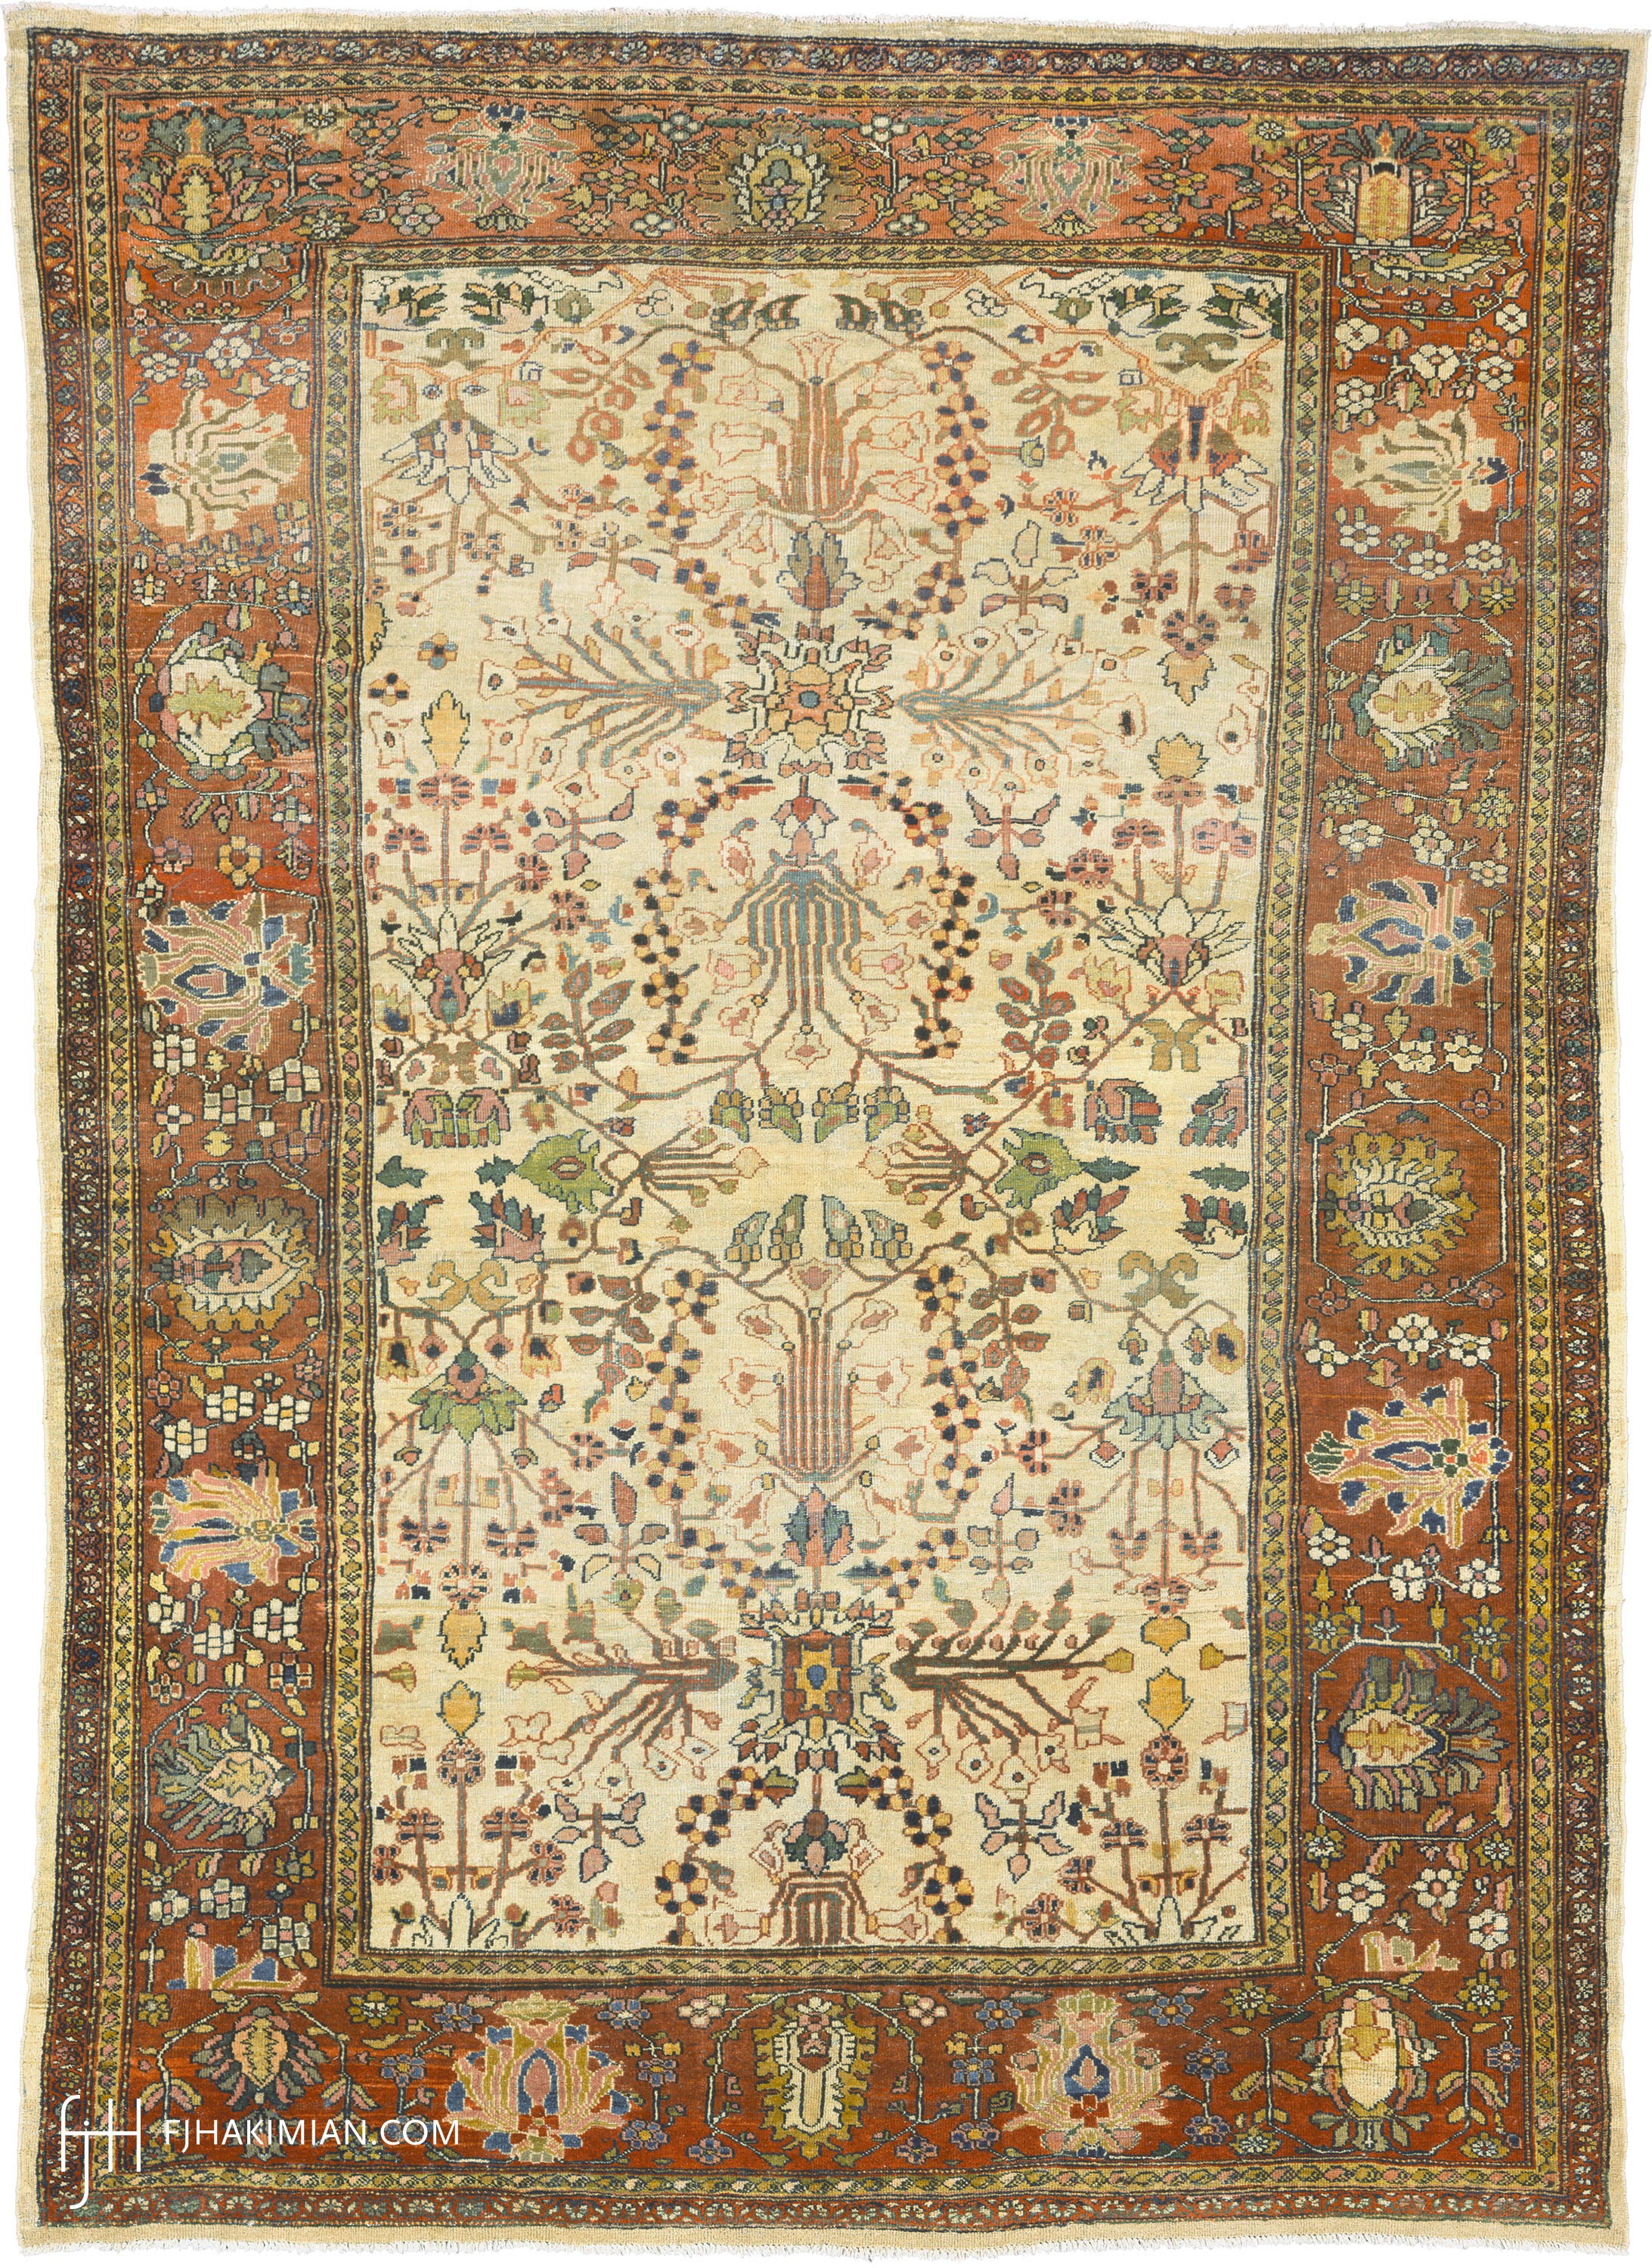 Sultanabad Carpet #6187 | Carpet Gallery in NYC